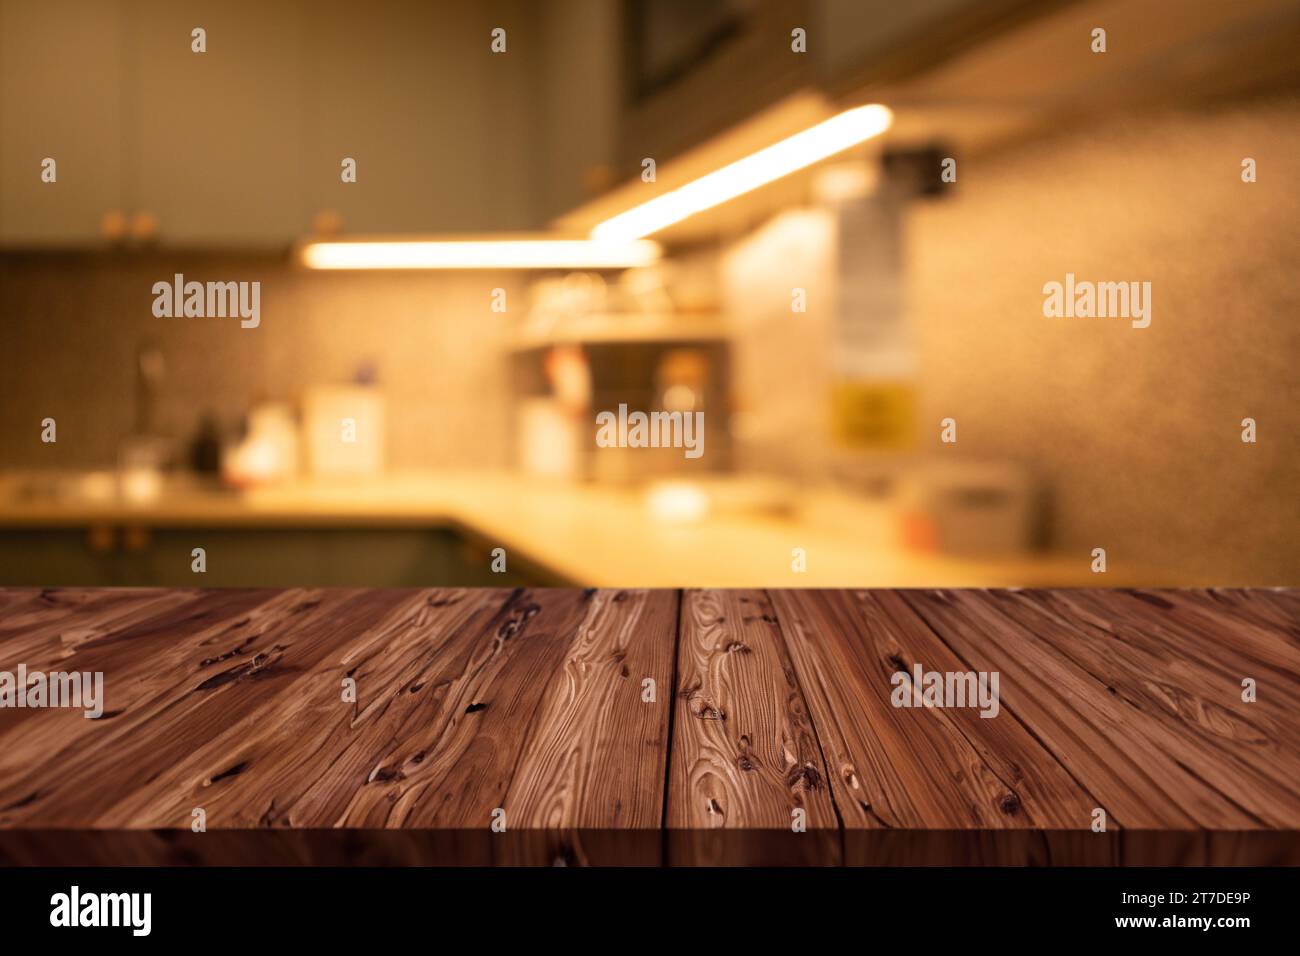 luxury dim light modern home kitchen counter interior with wooden foreground blank space for products advertising montage background Stock Photo